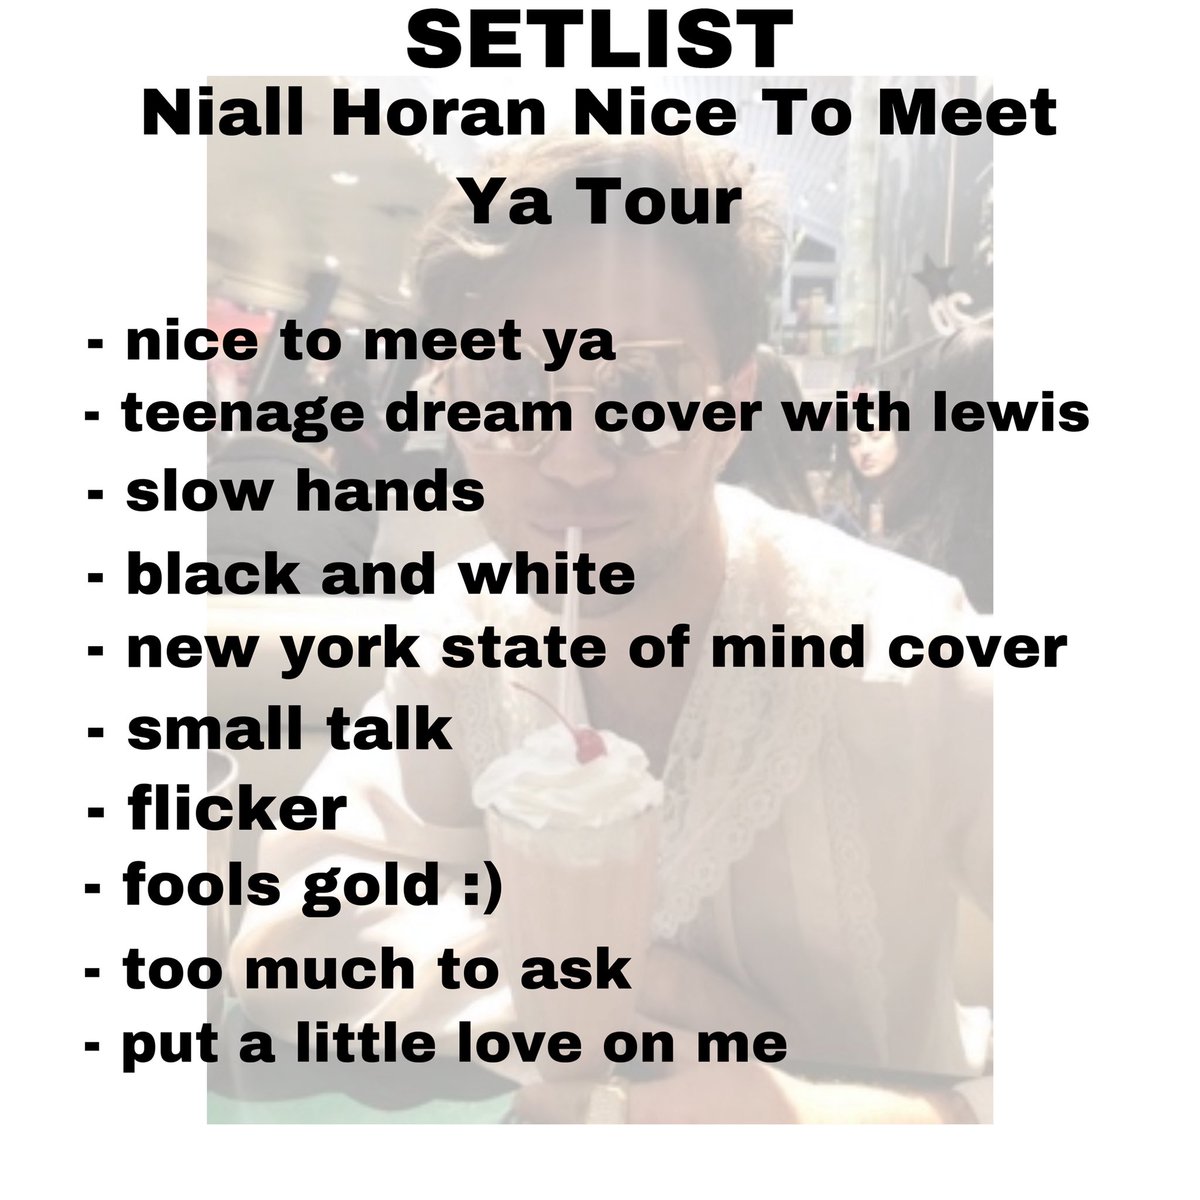 to anyone who would be seeing niall/would love to see niall<3welcome to this thread!! pls enjoy the show & rt so others can toohere’s the set list & ur ticket: